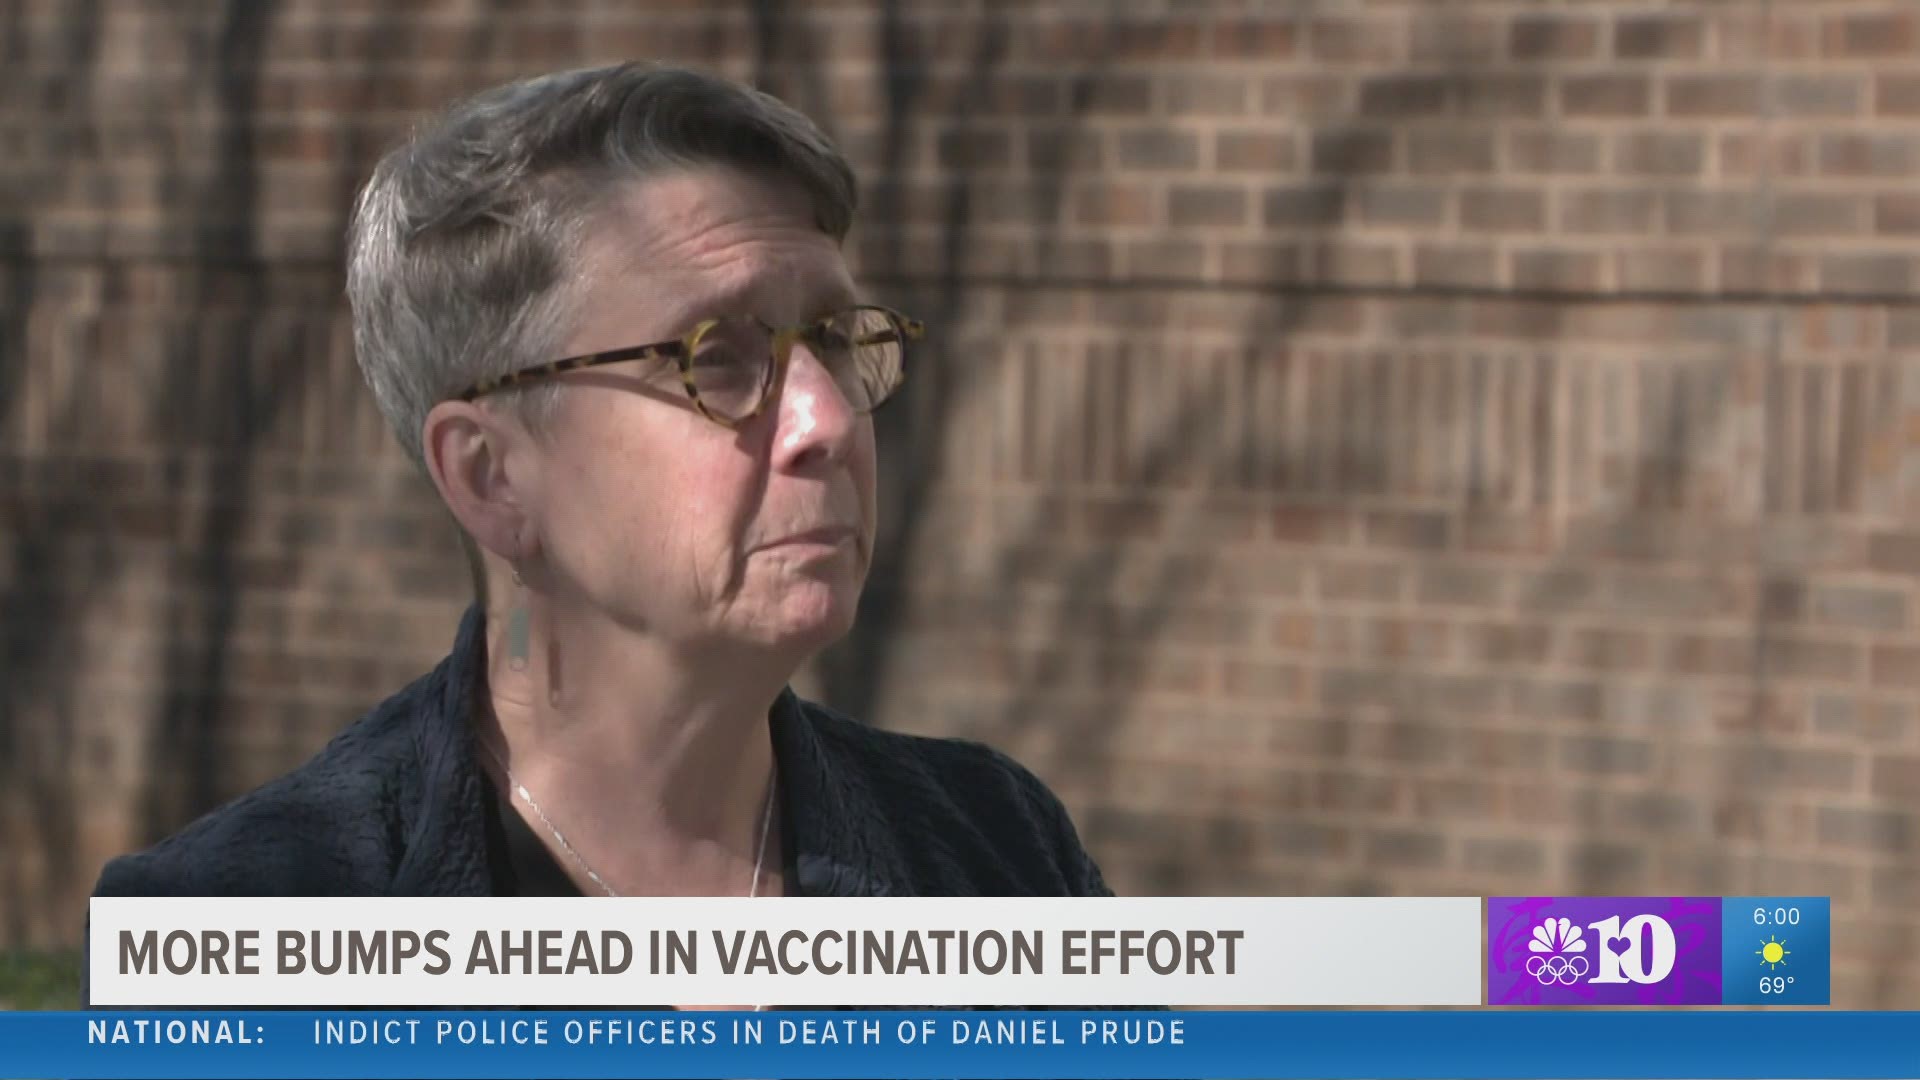 As the state hits another vaccination milestone, the director of the Knox County Health Department says the road ahead remains bumpy with shots still in short supply